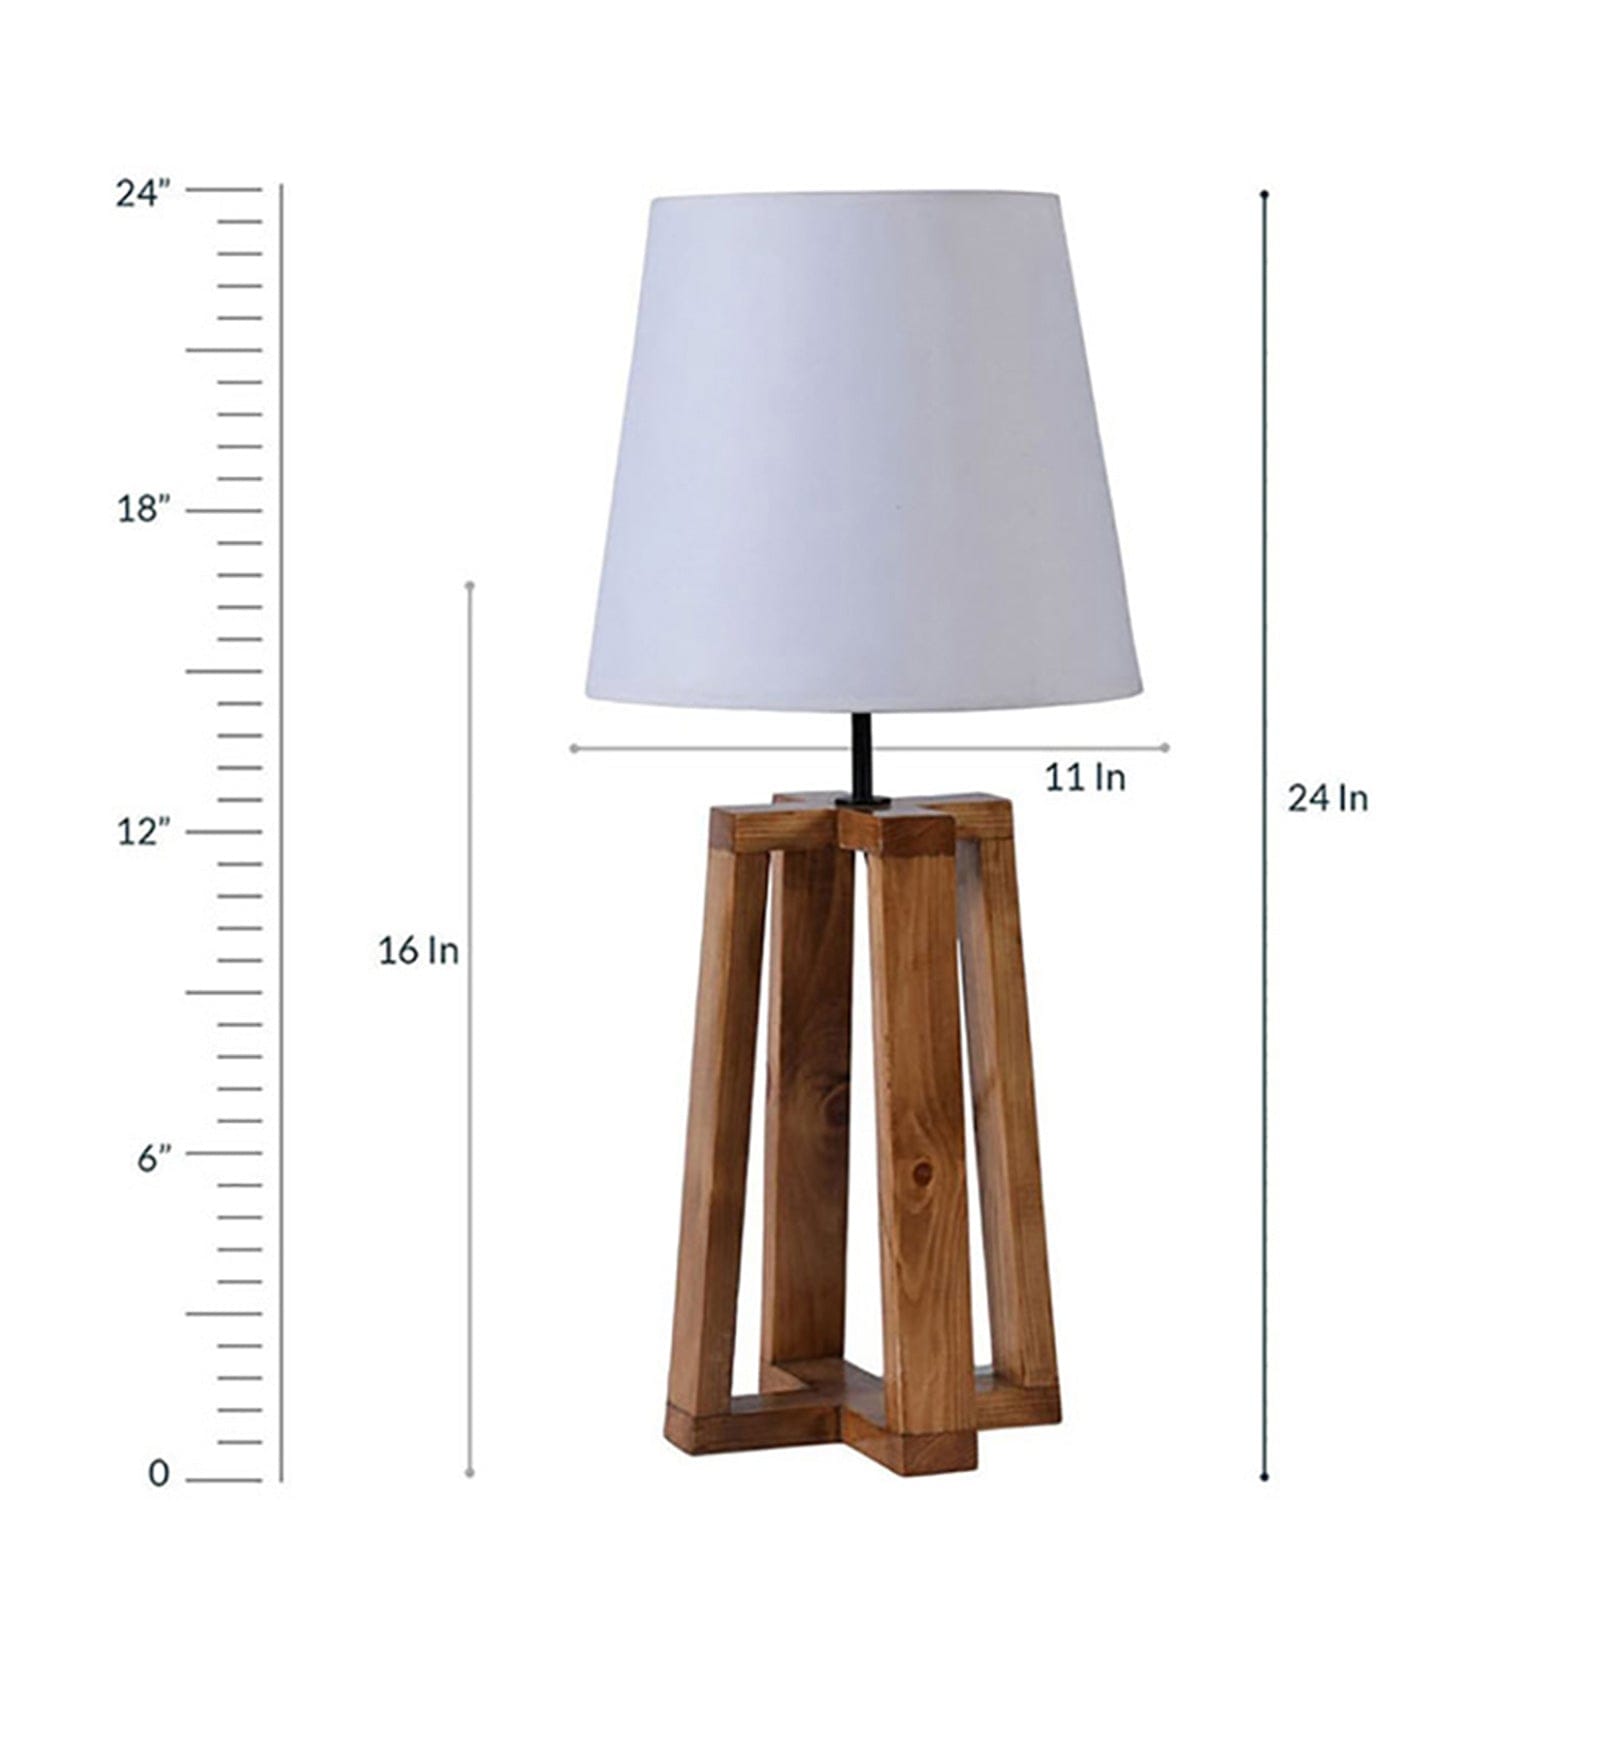 Blender Brown Wooden Table Lamp with White Fabric Lampshade (BULB NOT INCLUDED)